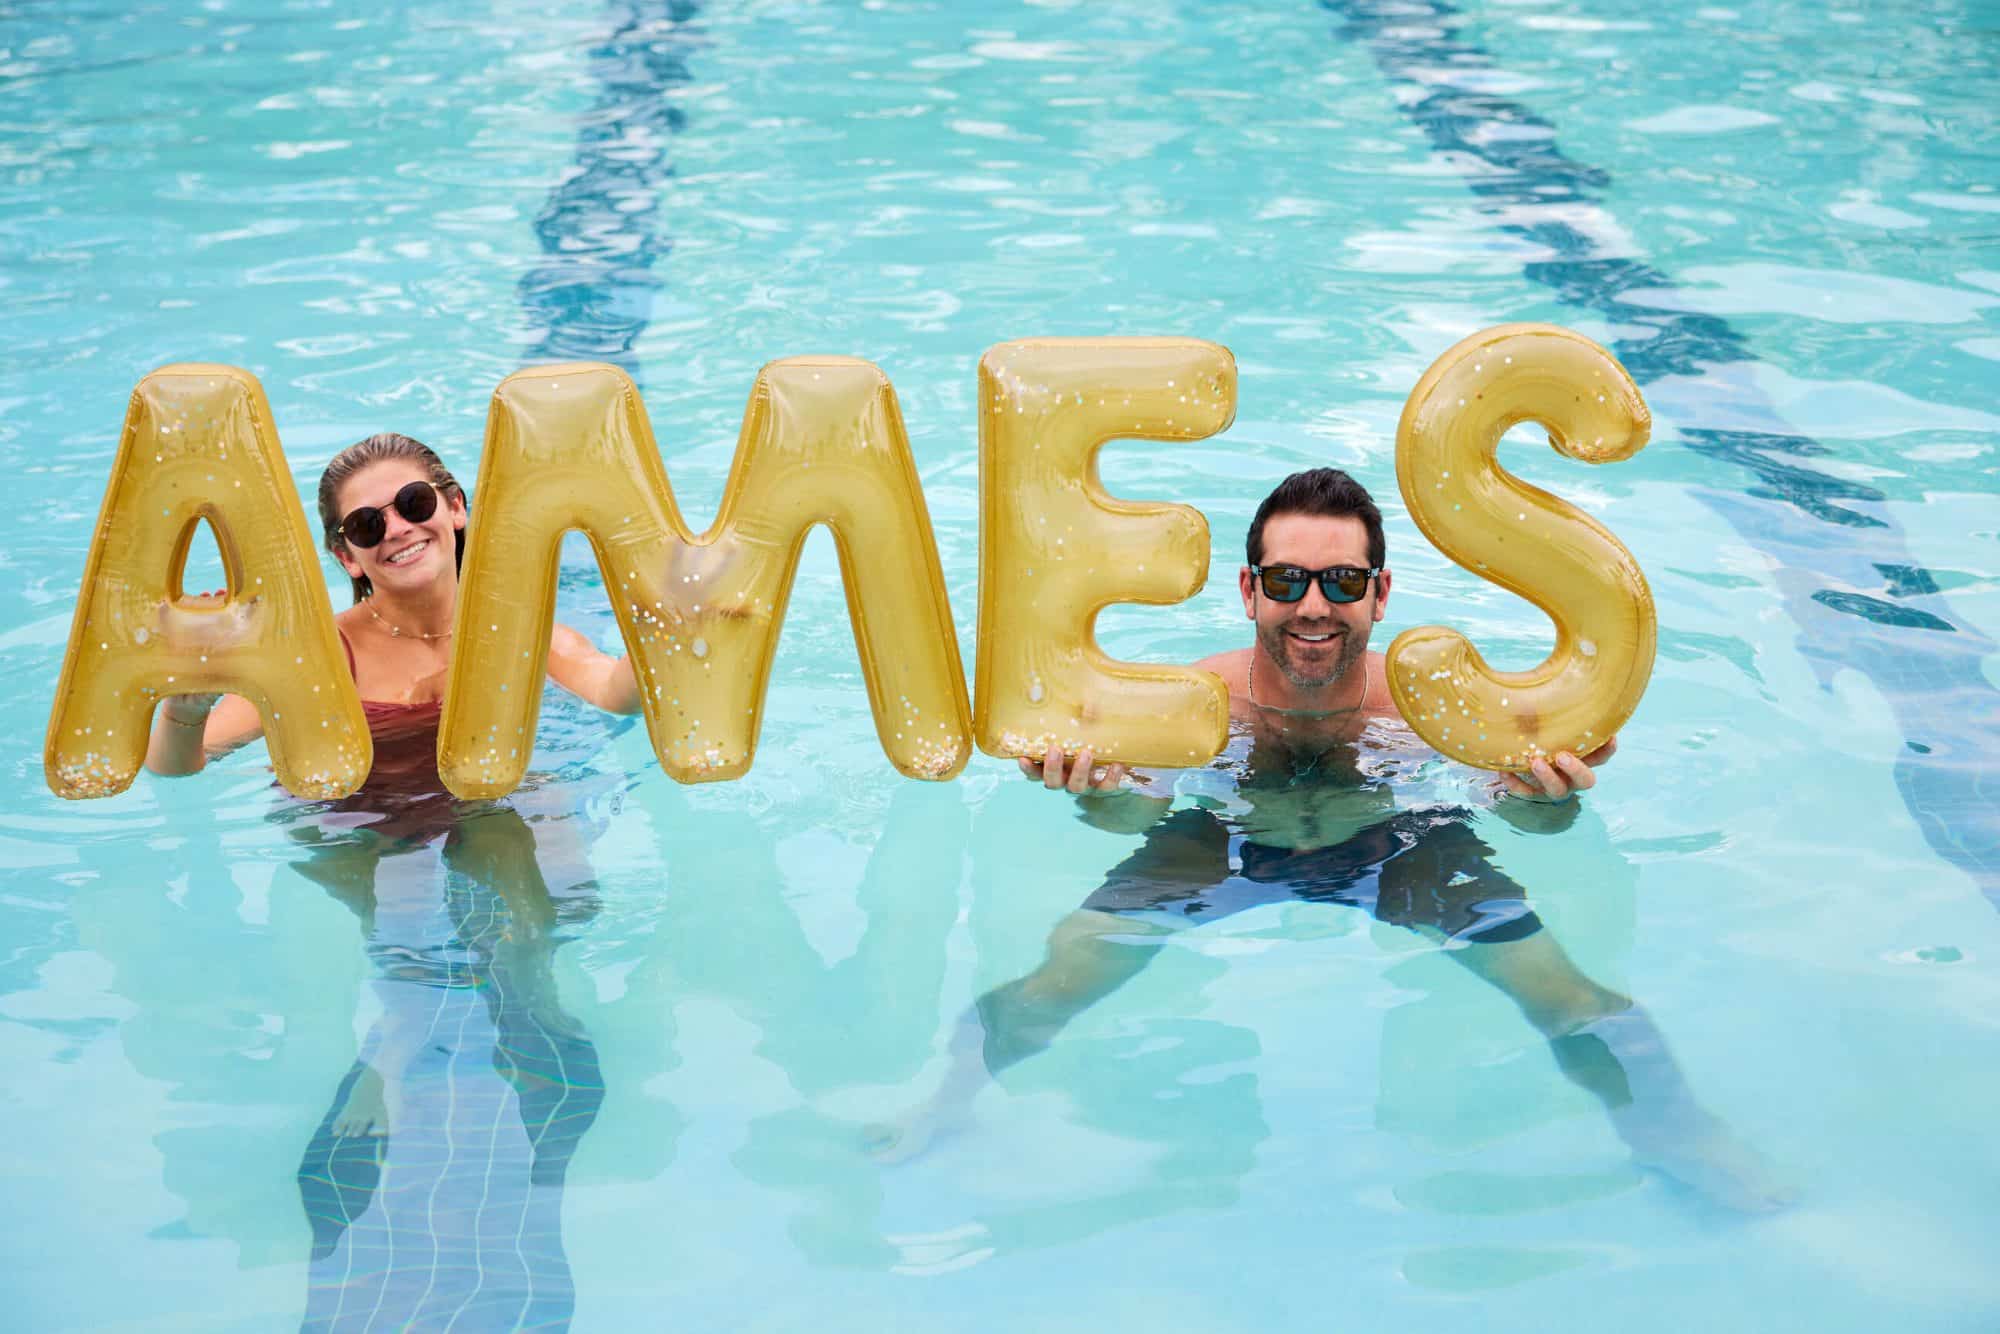 Two residents holding up baloons that spell out "Ames" in the pool